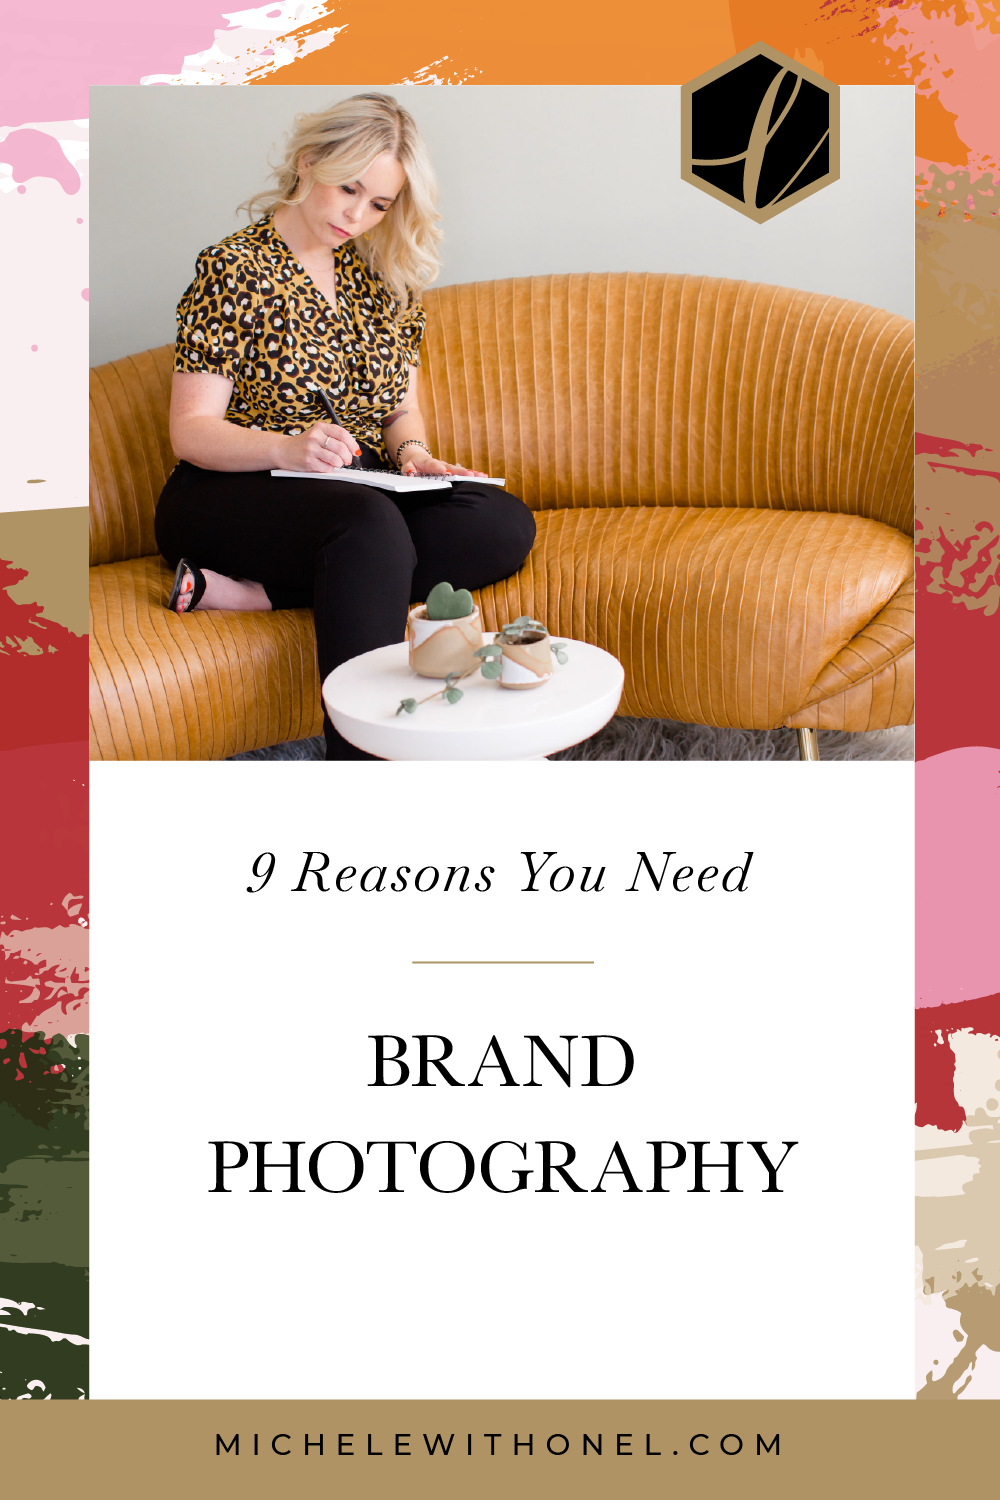 Looking for some fresh brand photography ideas? This post is for you! Check out 9 unique ways to use your new branding photos—including personal branding tips, headshot ideas, and things to do after your brand session. #headshots #branding #business #photography